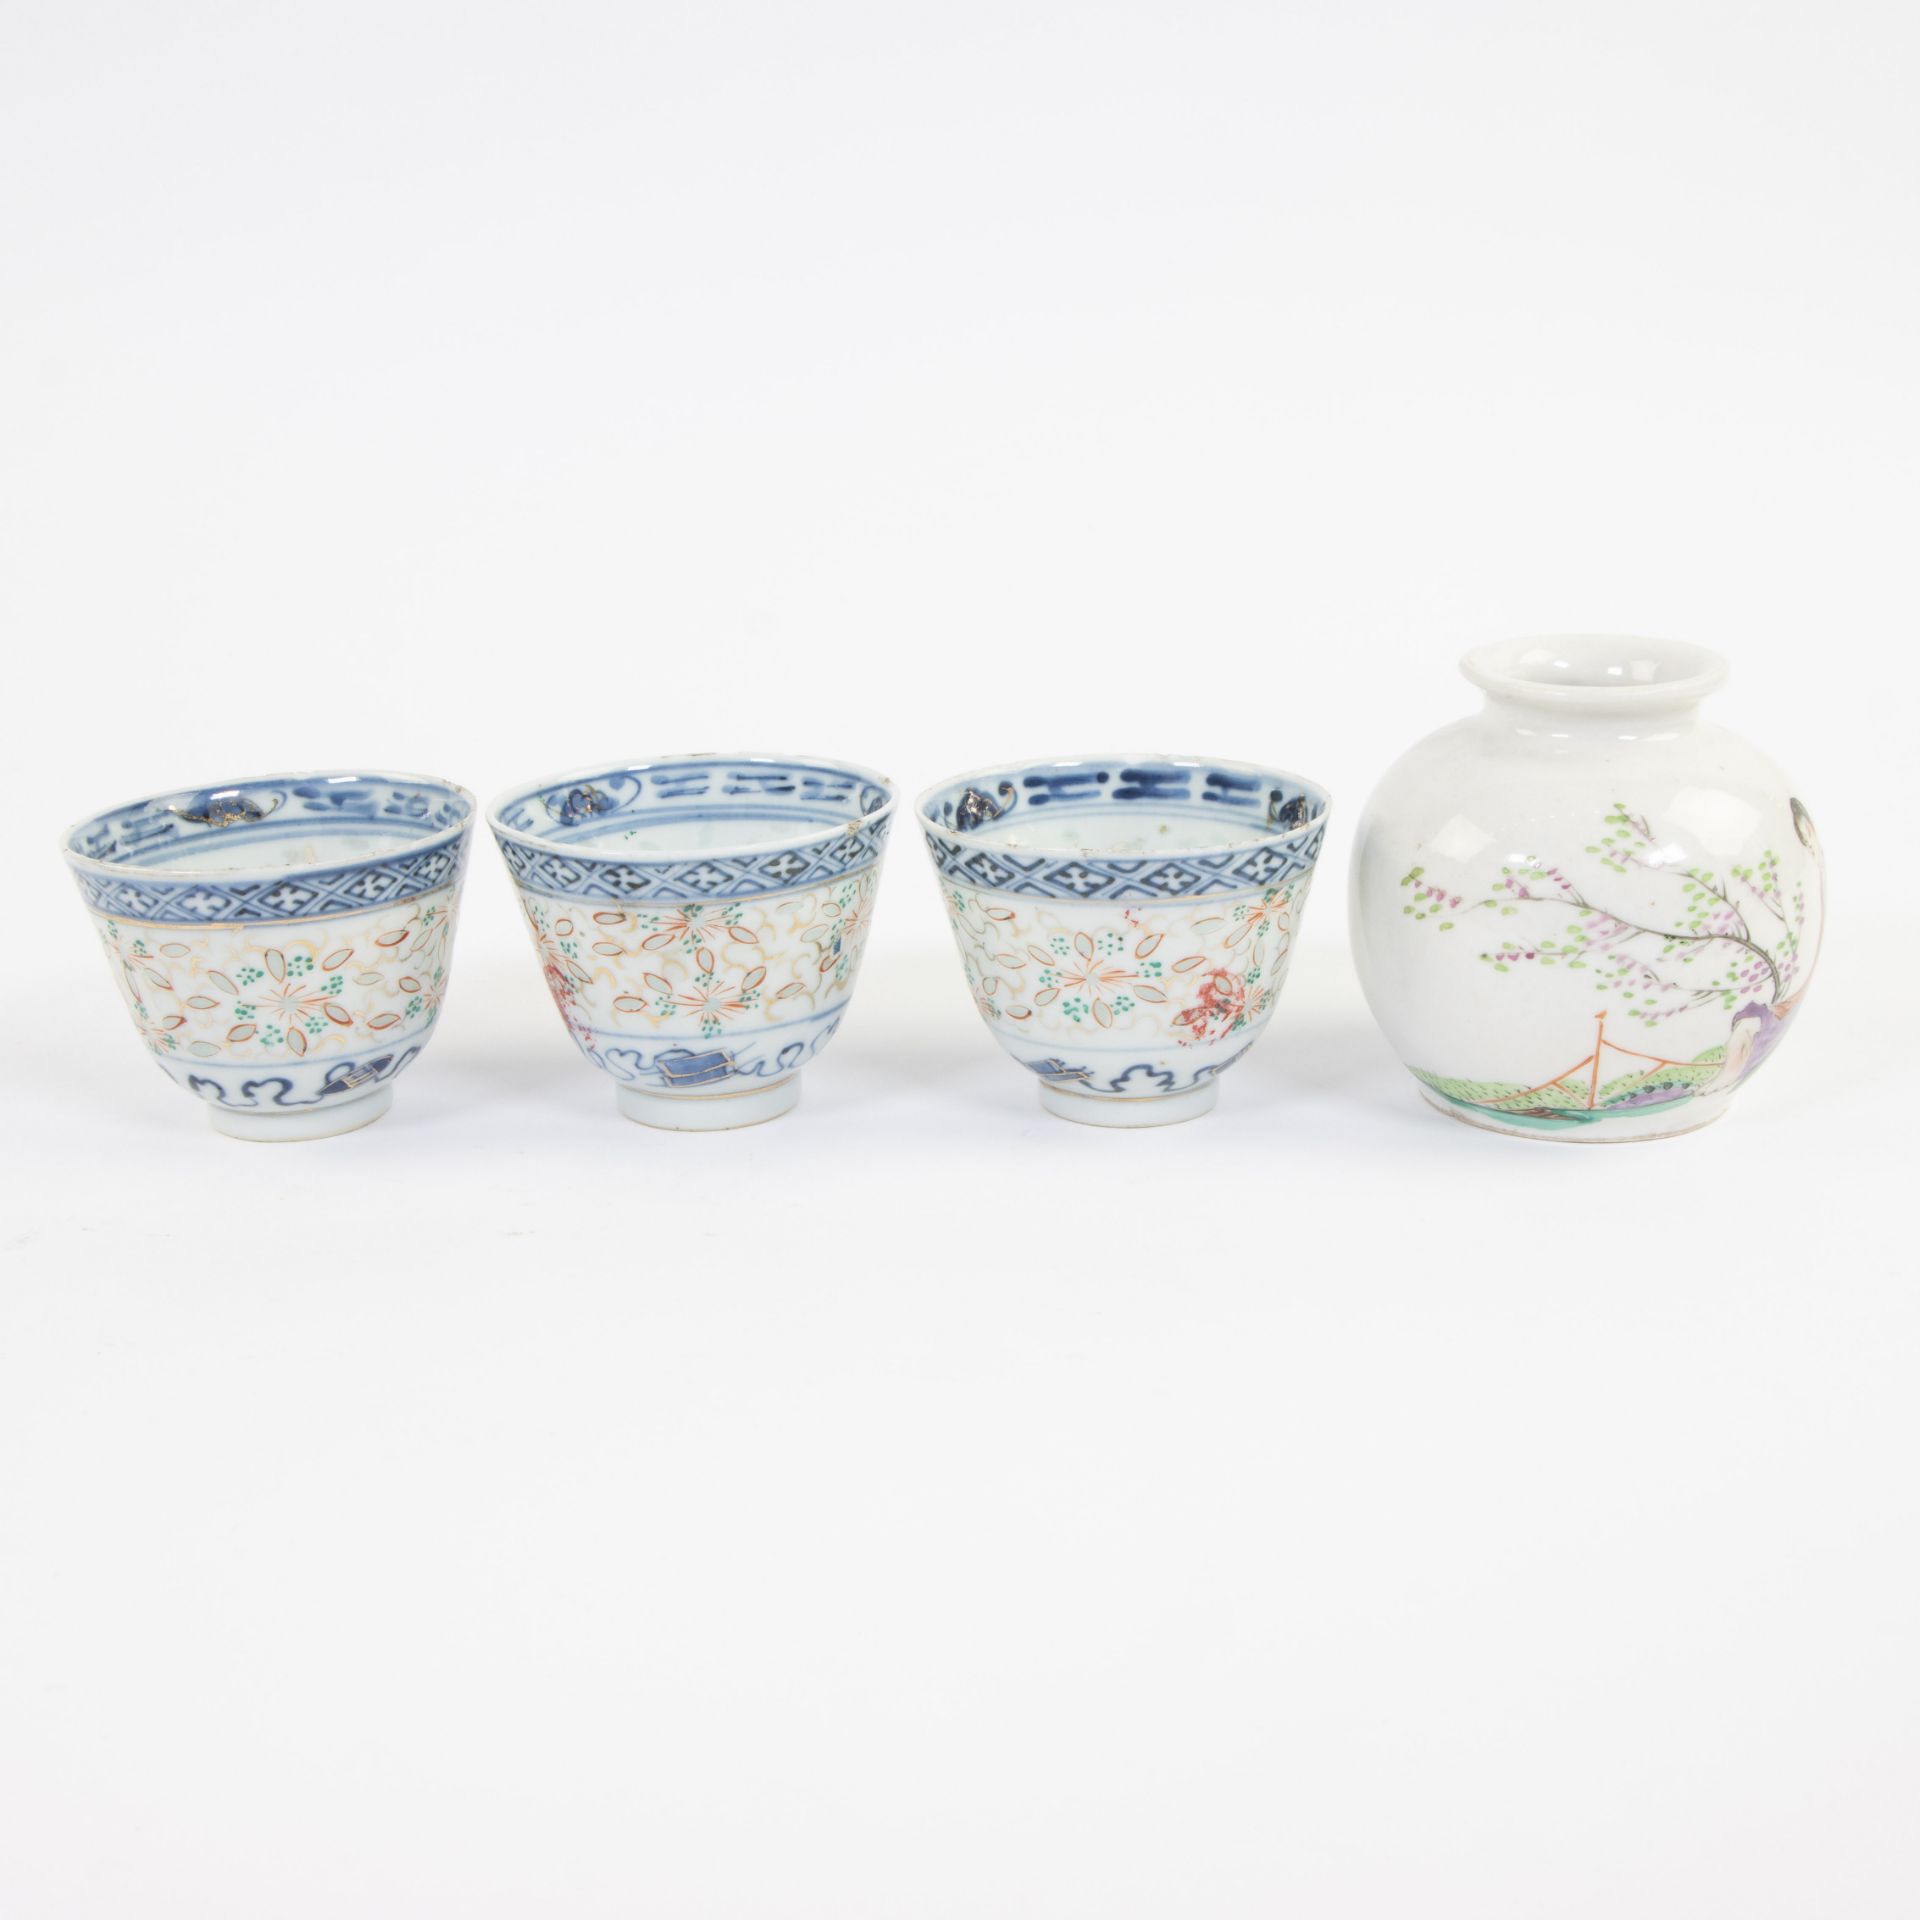 Collection of Chinese porcelain: plates, bowls and vase - Image 9 of 10